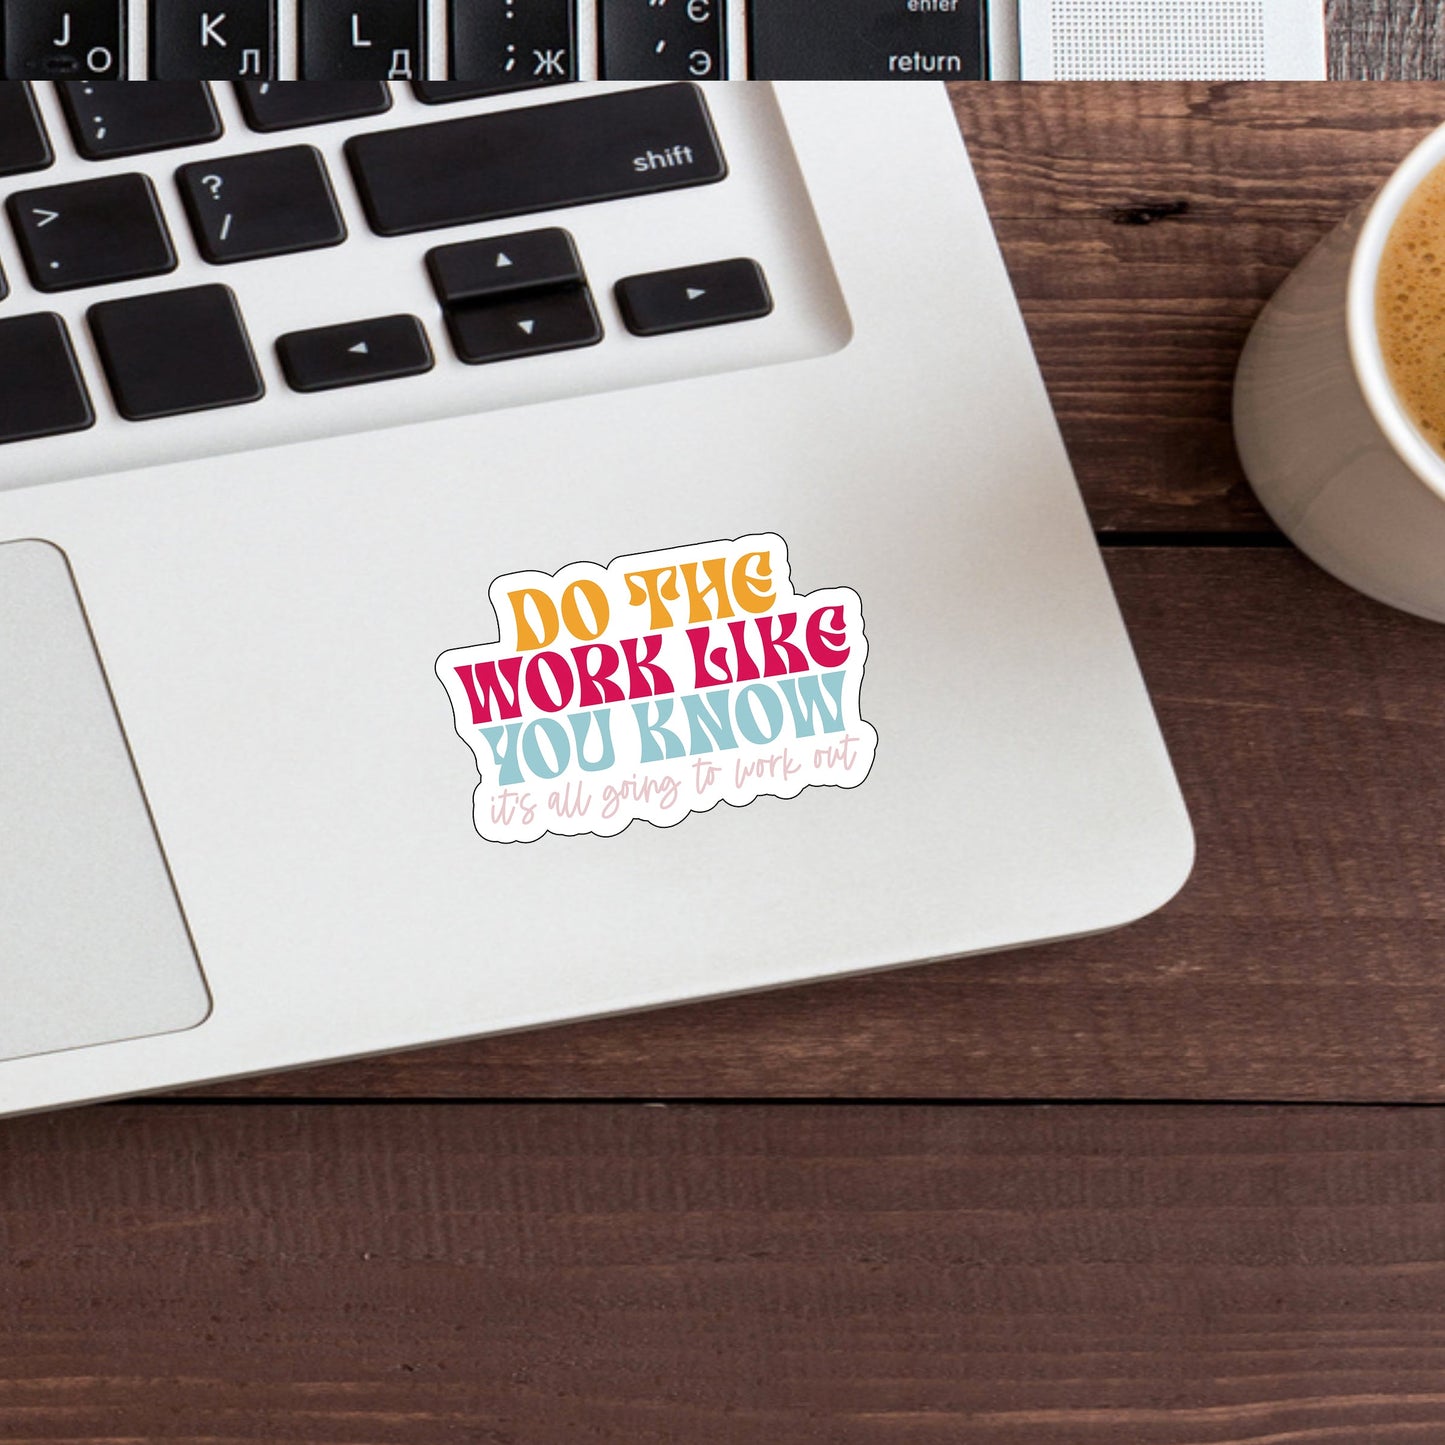 Do the work like you know its all going to workout  Sticker,  Vinyl sticker, laptop sticker, Tablet sticker